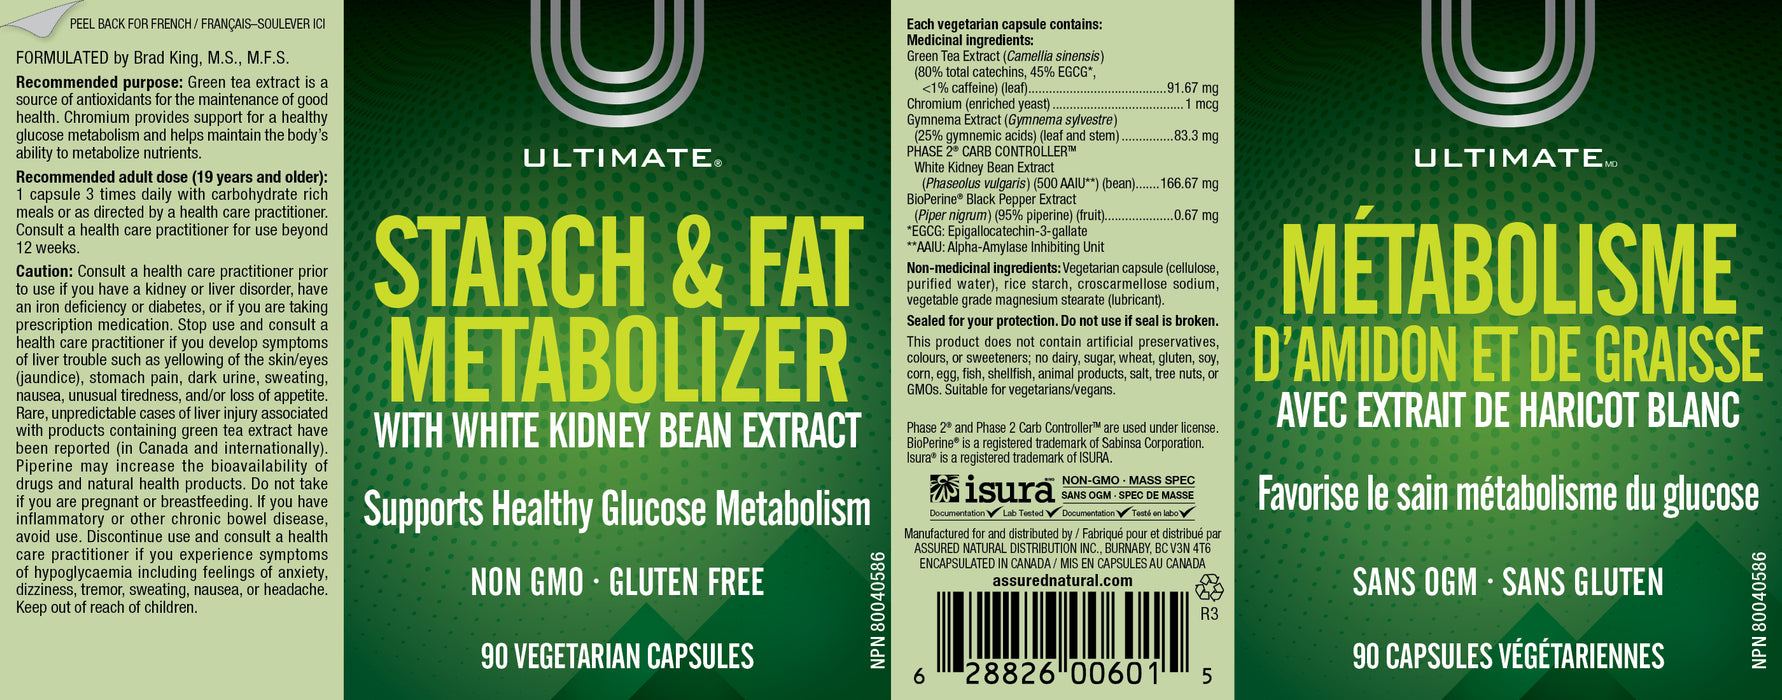 Ultimate Starch & Fat Metabolizer 90 Veg Capsules